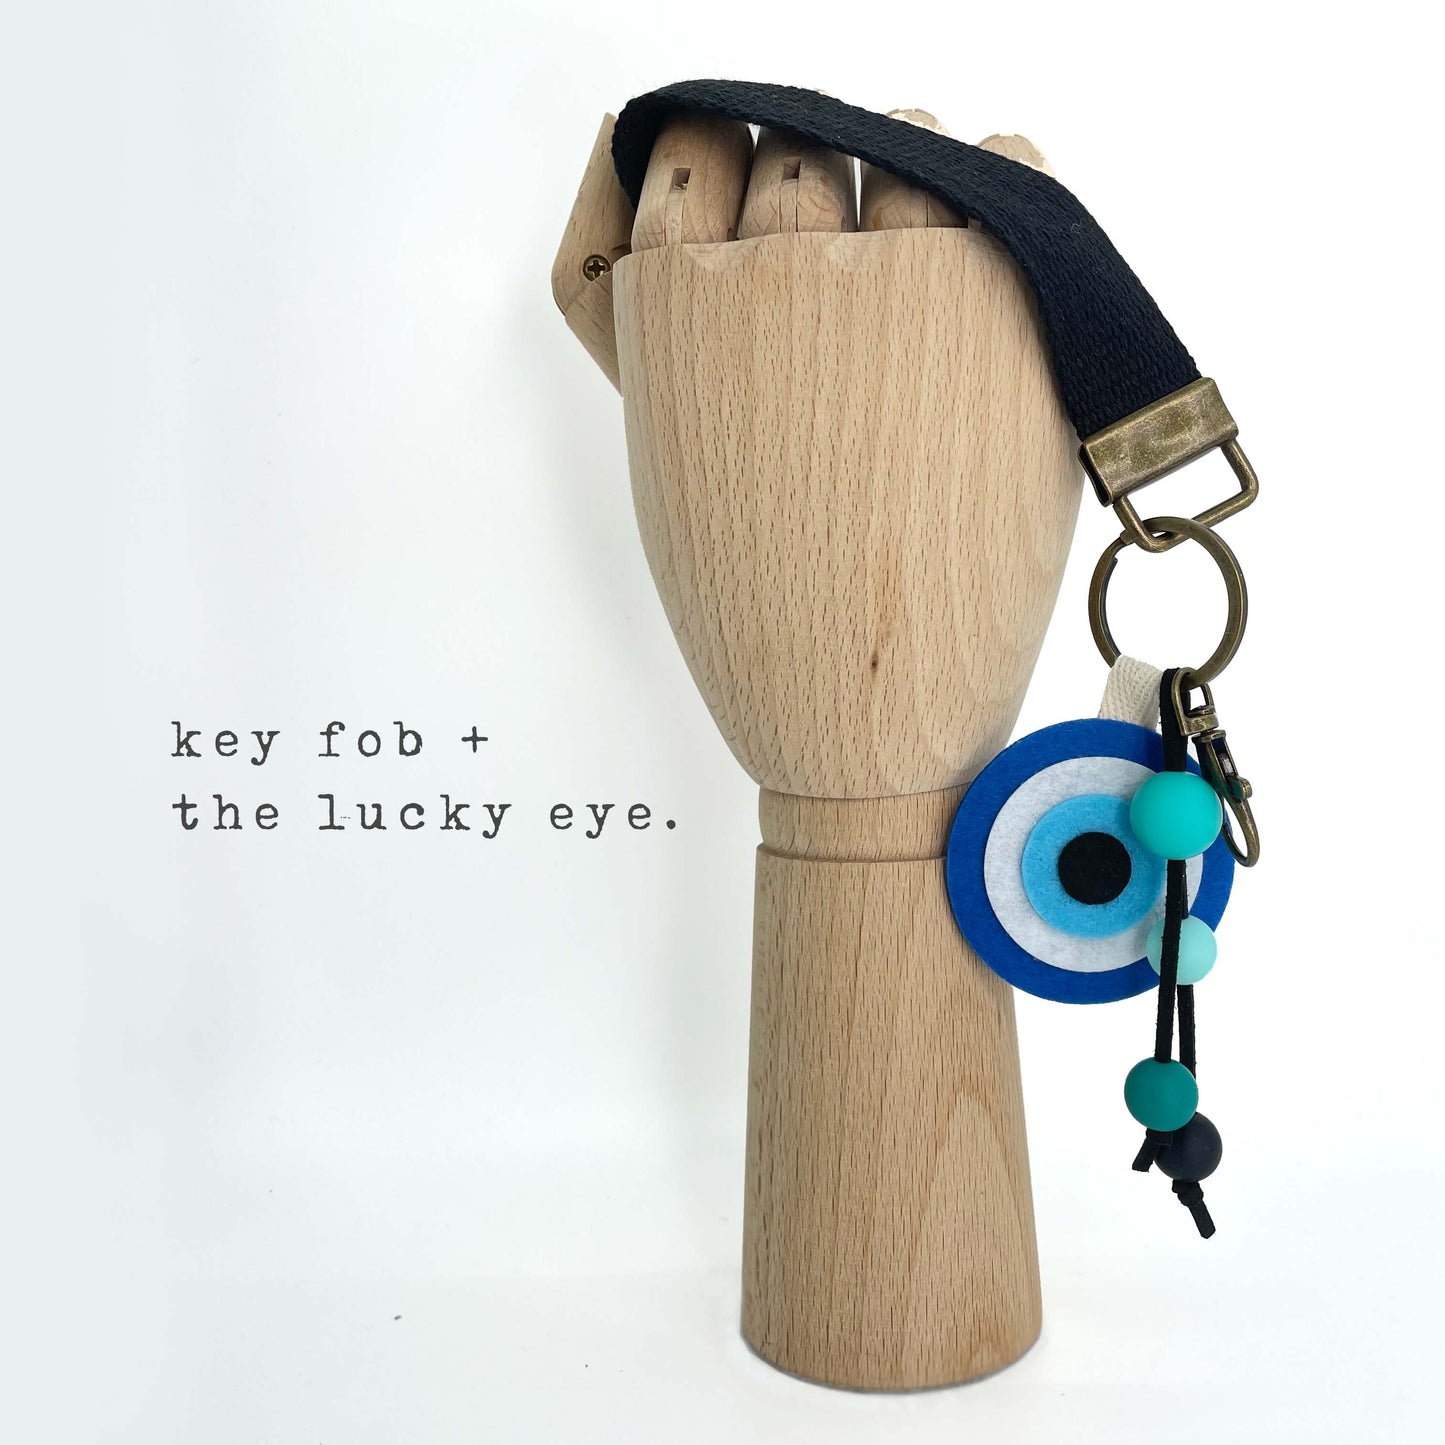 One day at a time.Keychain